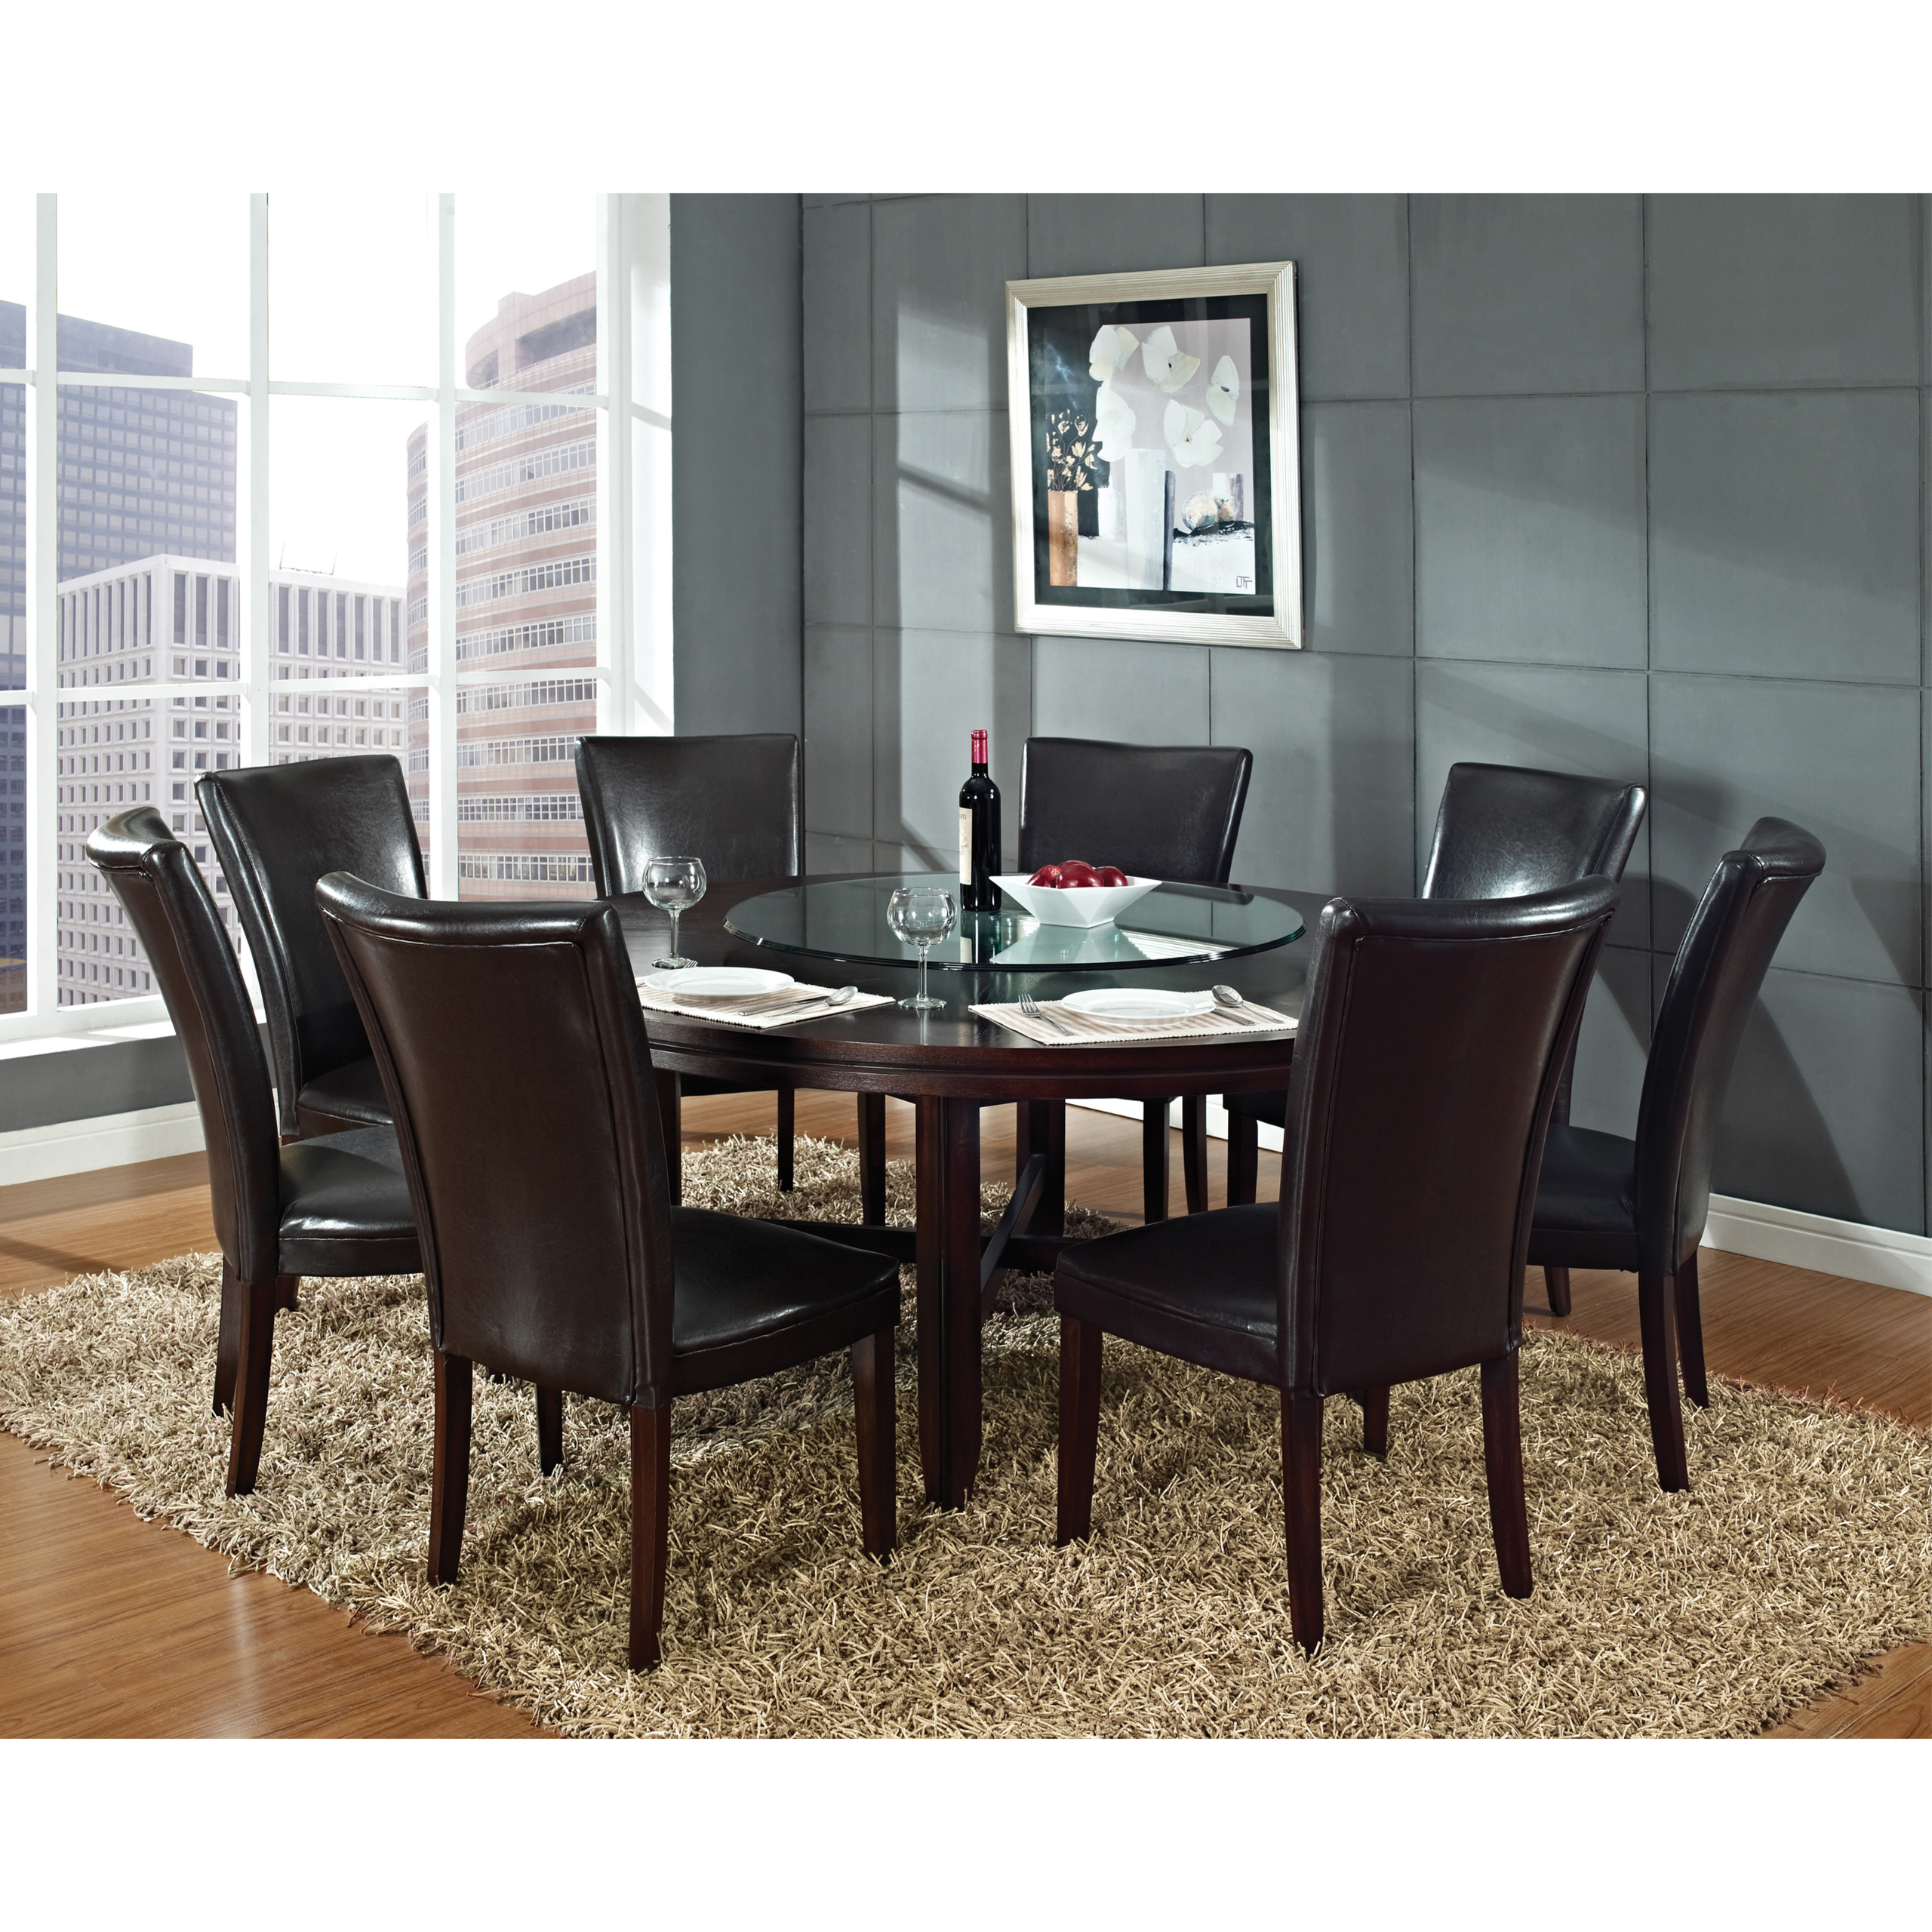 Round Dining Table For 6 Visualhunt, Mid Century Modern Round Dining Table Set For 6 Persons